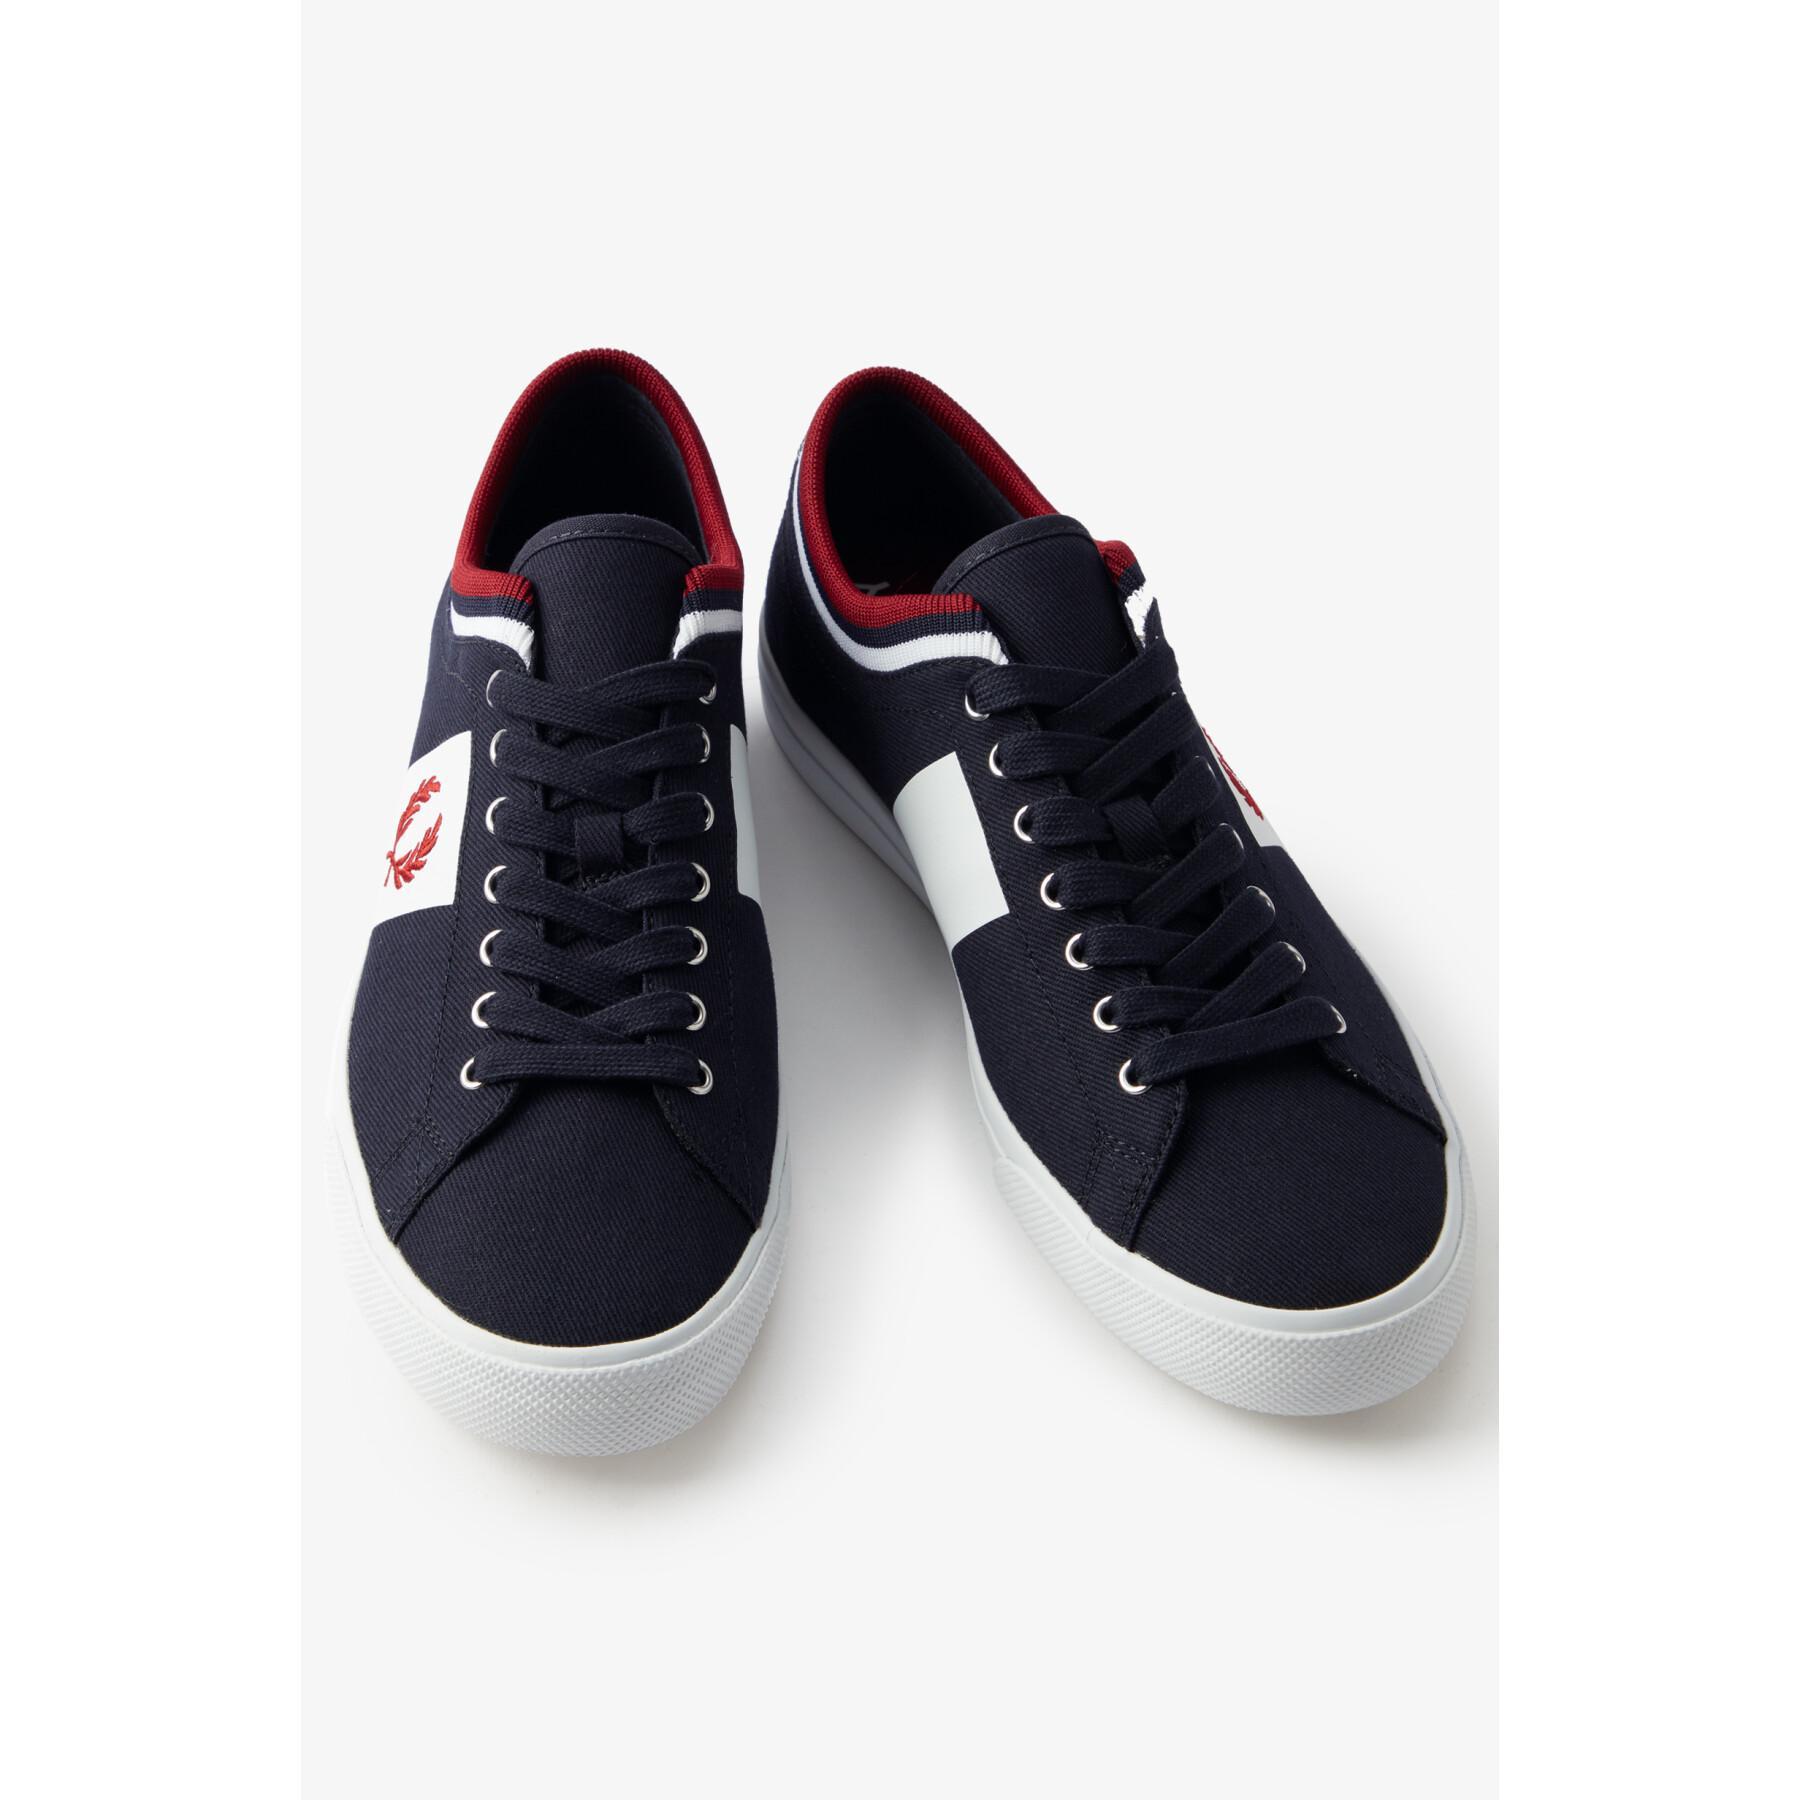 Formadores de sarjetas Fred Perry Underspin tipped cuff